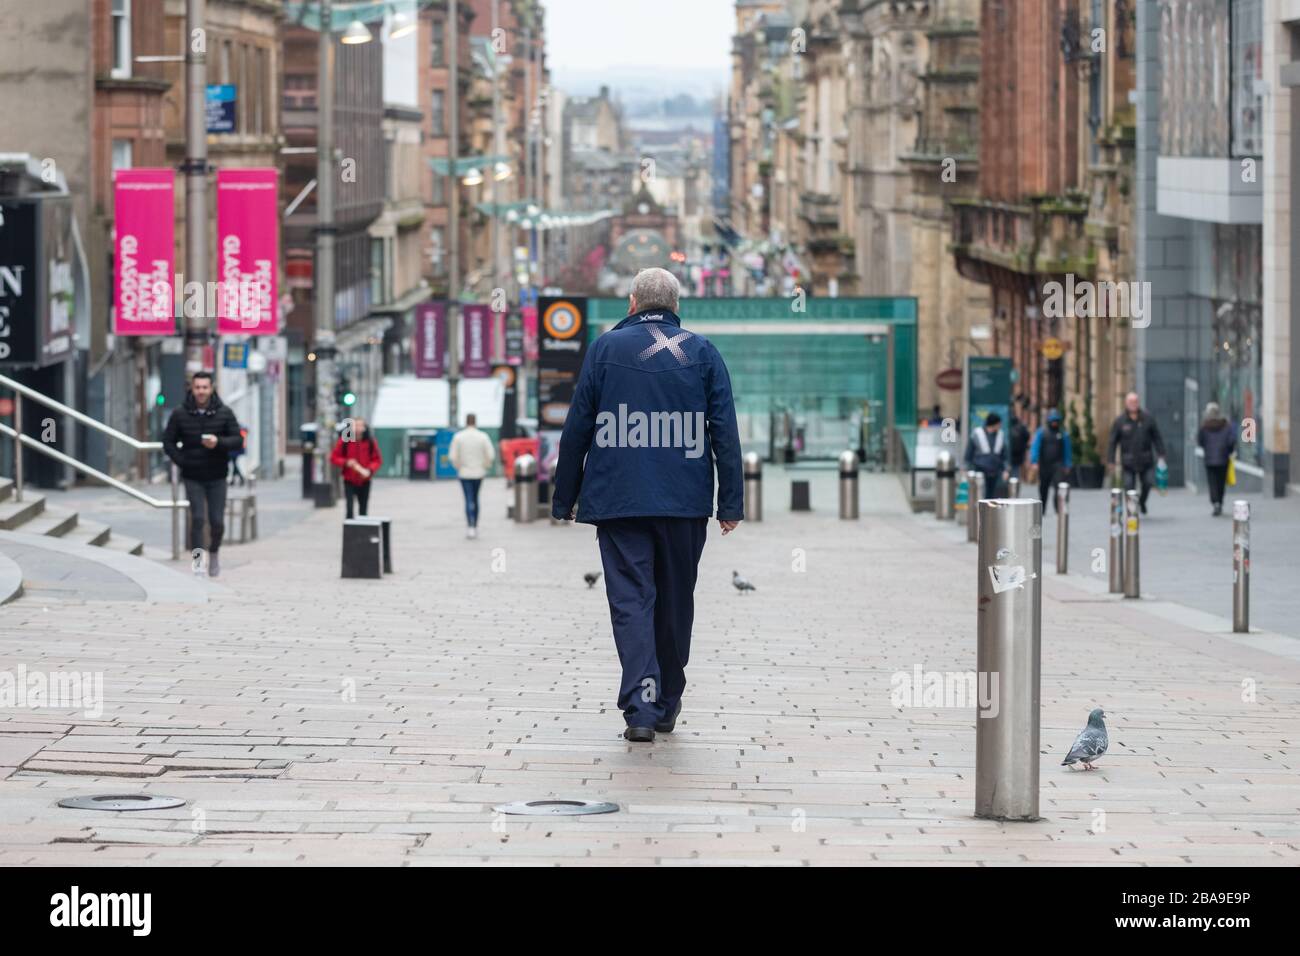 Glasgow, Scotland, UK. 26th Mar, 2020. Coronavirus lockdown Glasgow, Scotland: A Scotrail keyworker one of only a few people on the streets of Glasgow city centre at lunchtime during the coronavirus lockdown . Credit: Kay Roxby/Alamy Live News Stock Photo